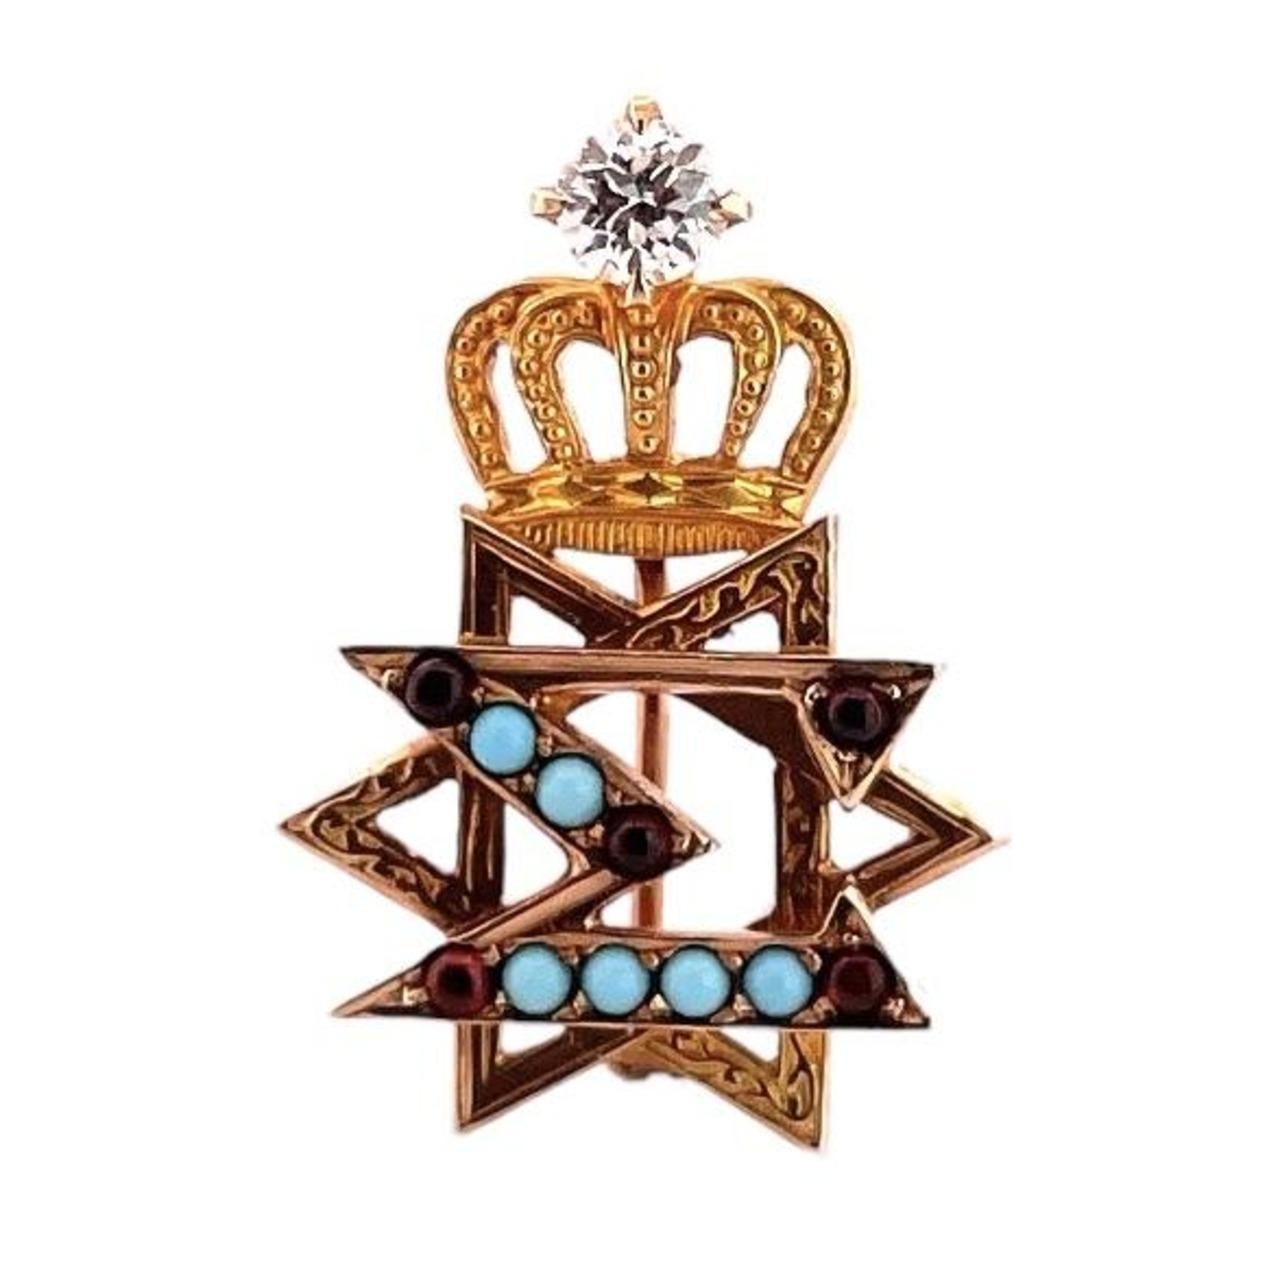 10K Yellow Gold Turquoise and Garnet Star of David Fraternity Pin is a symbolic piece of jewelry that beautifully combines religious significance with timeless elegance.
Crafted from high-quality 10-karat gold
The pin takes the form of the Star of